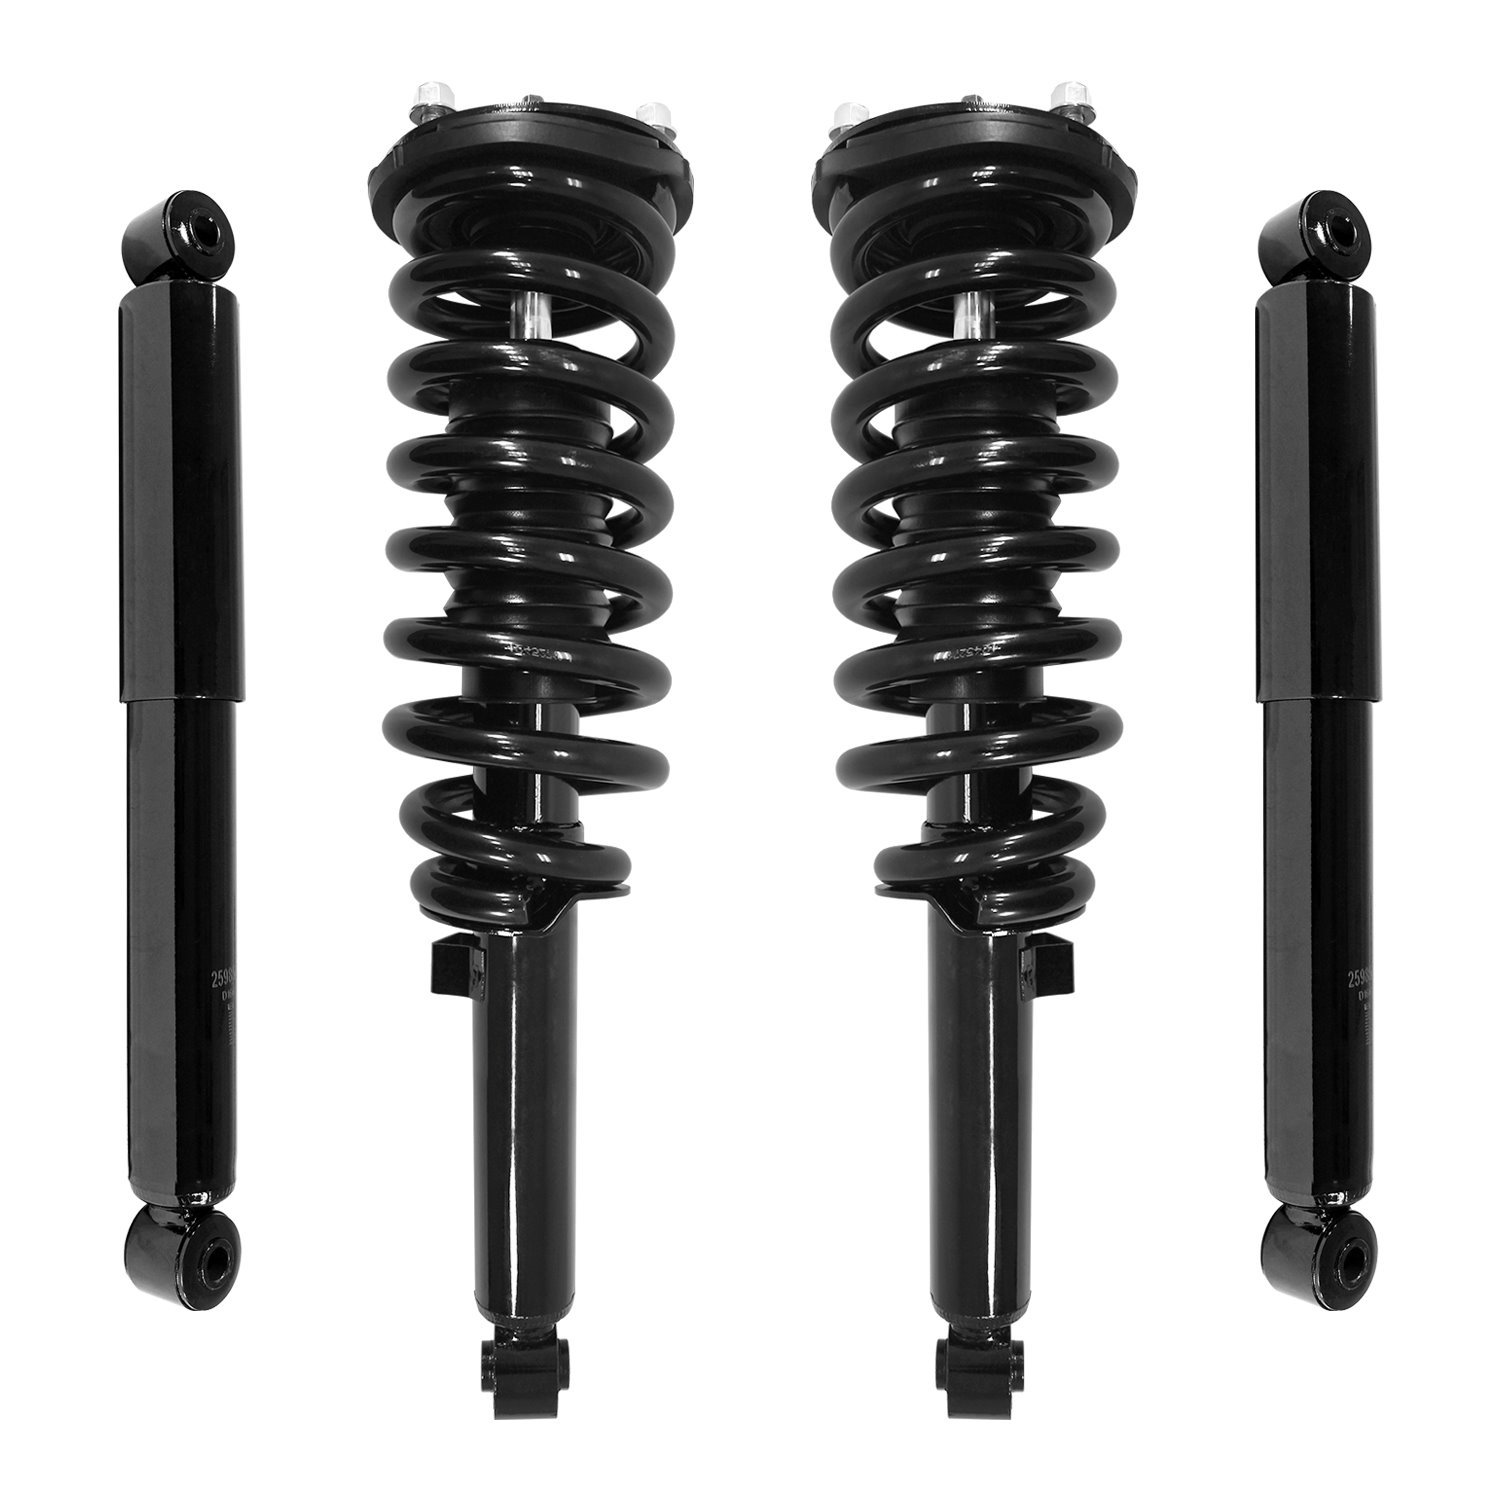 4-11653-259850-001 Front & Rear Suspension Strut & Coil Spring Assembly Fits Select Kia Sorento